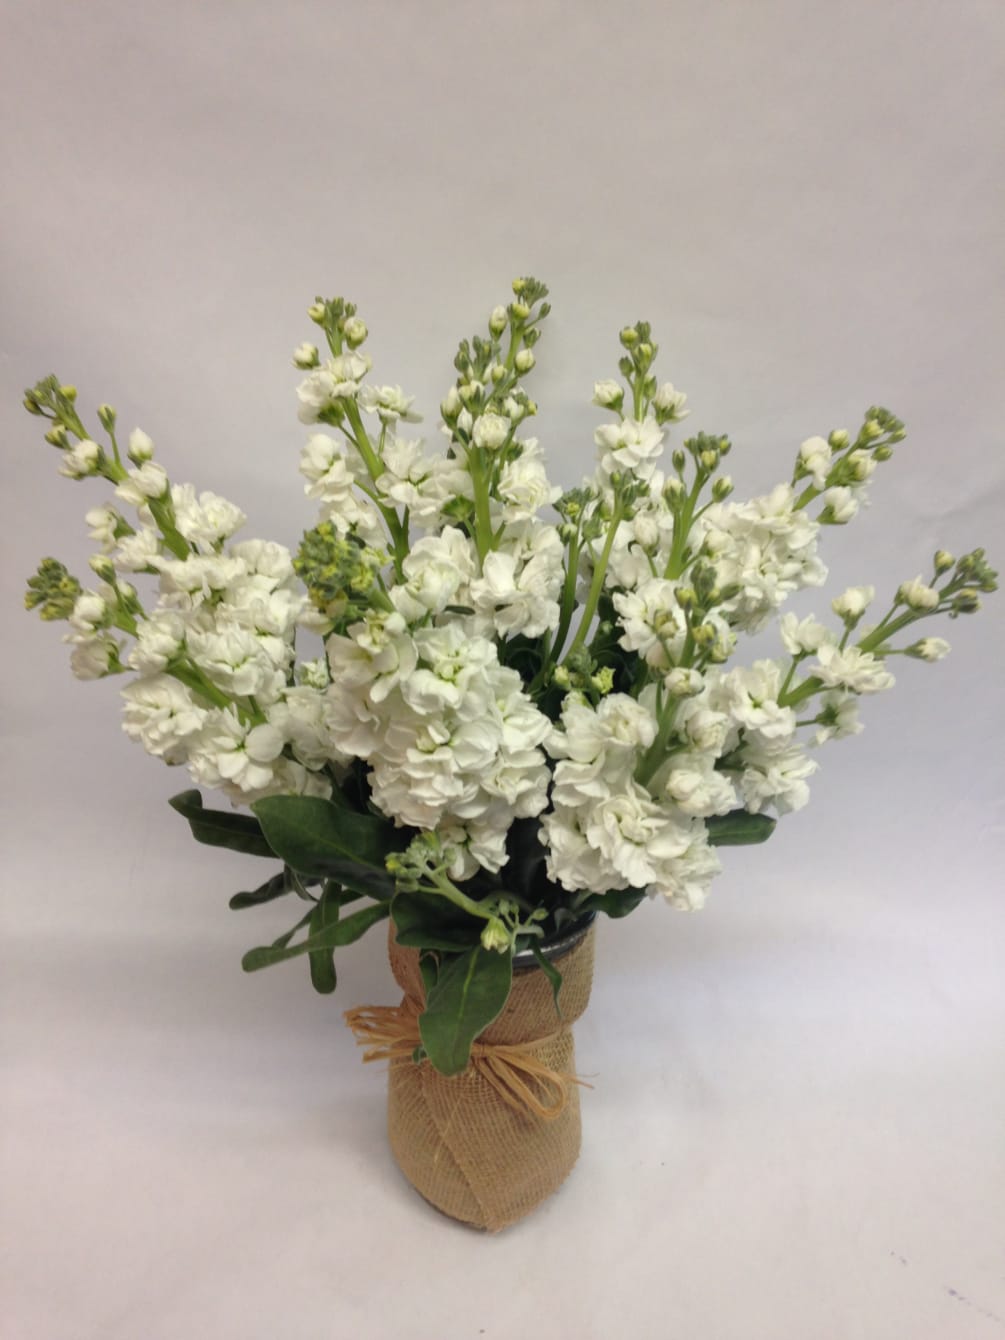 This simple vase arrangement is filled with frangrant, white stock stems and